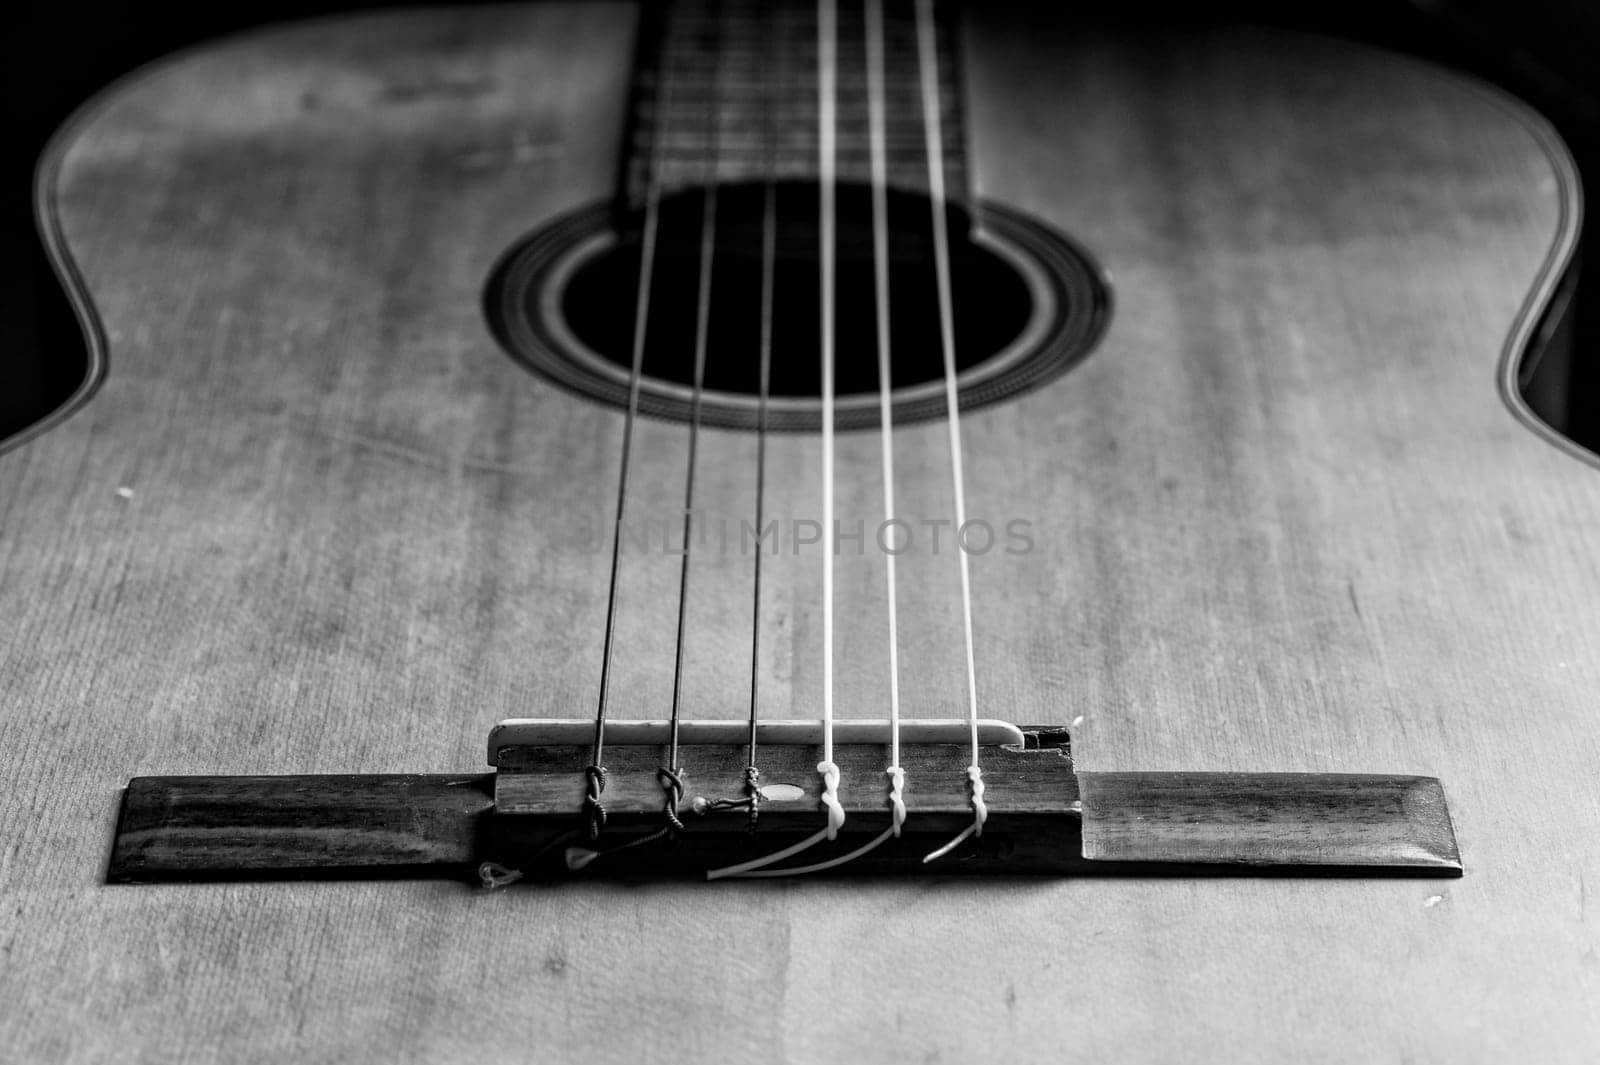 abstract classical guitar. closeup details of the guitar with shallow depth of field.